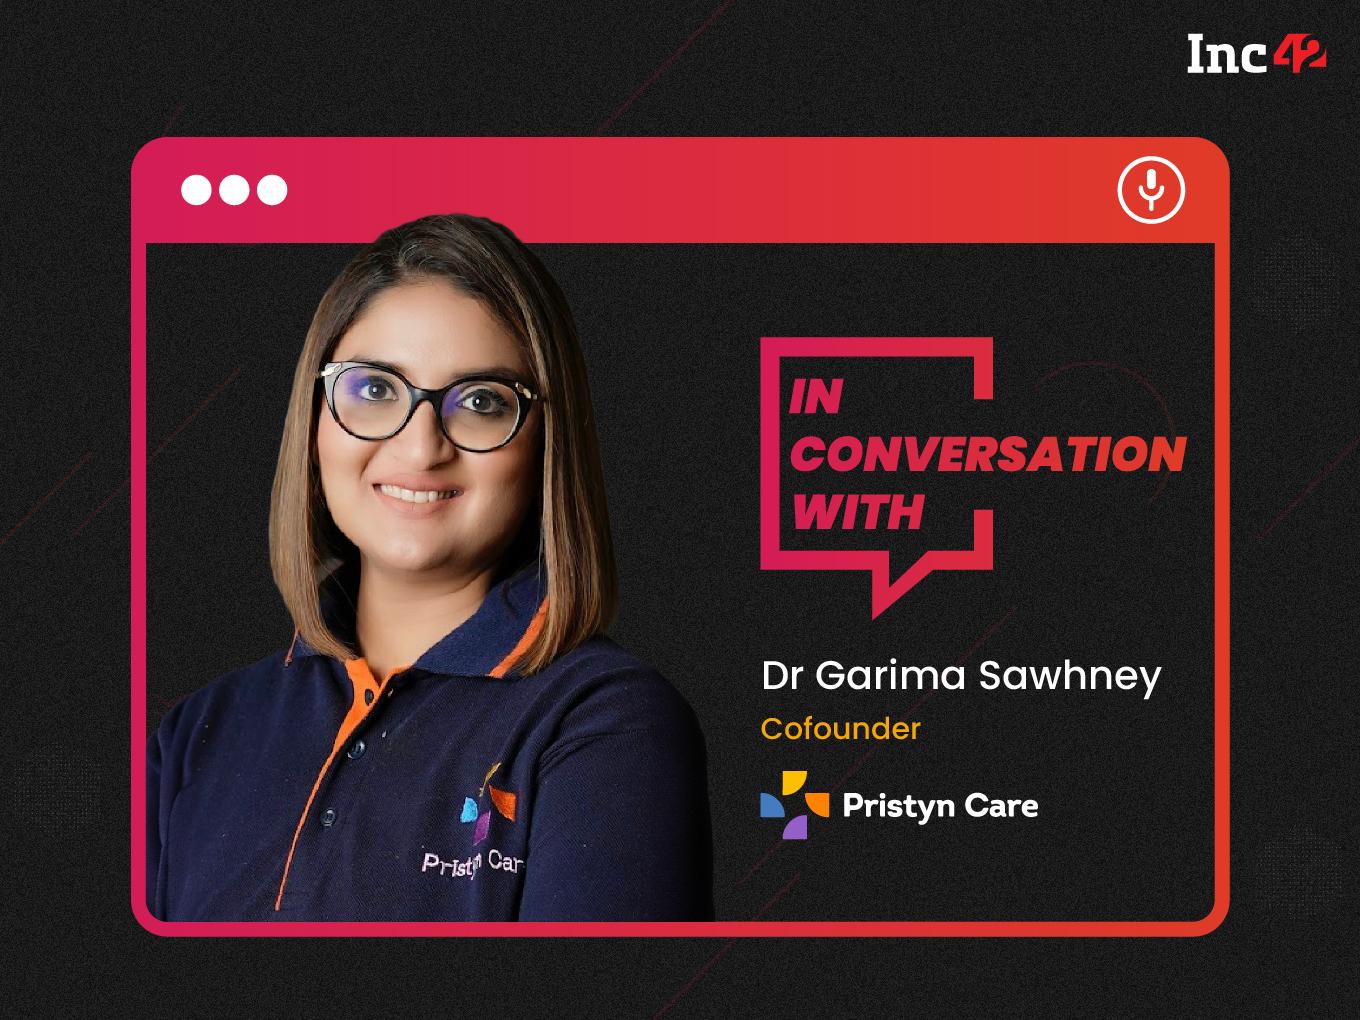 Pristyn Care’s Approach Is Rooted In Patient-Centricity: Cofounder Dr Garima Sawhney